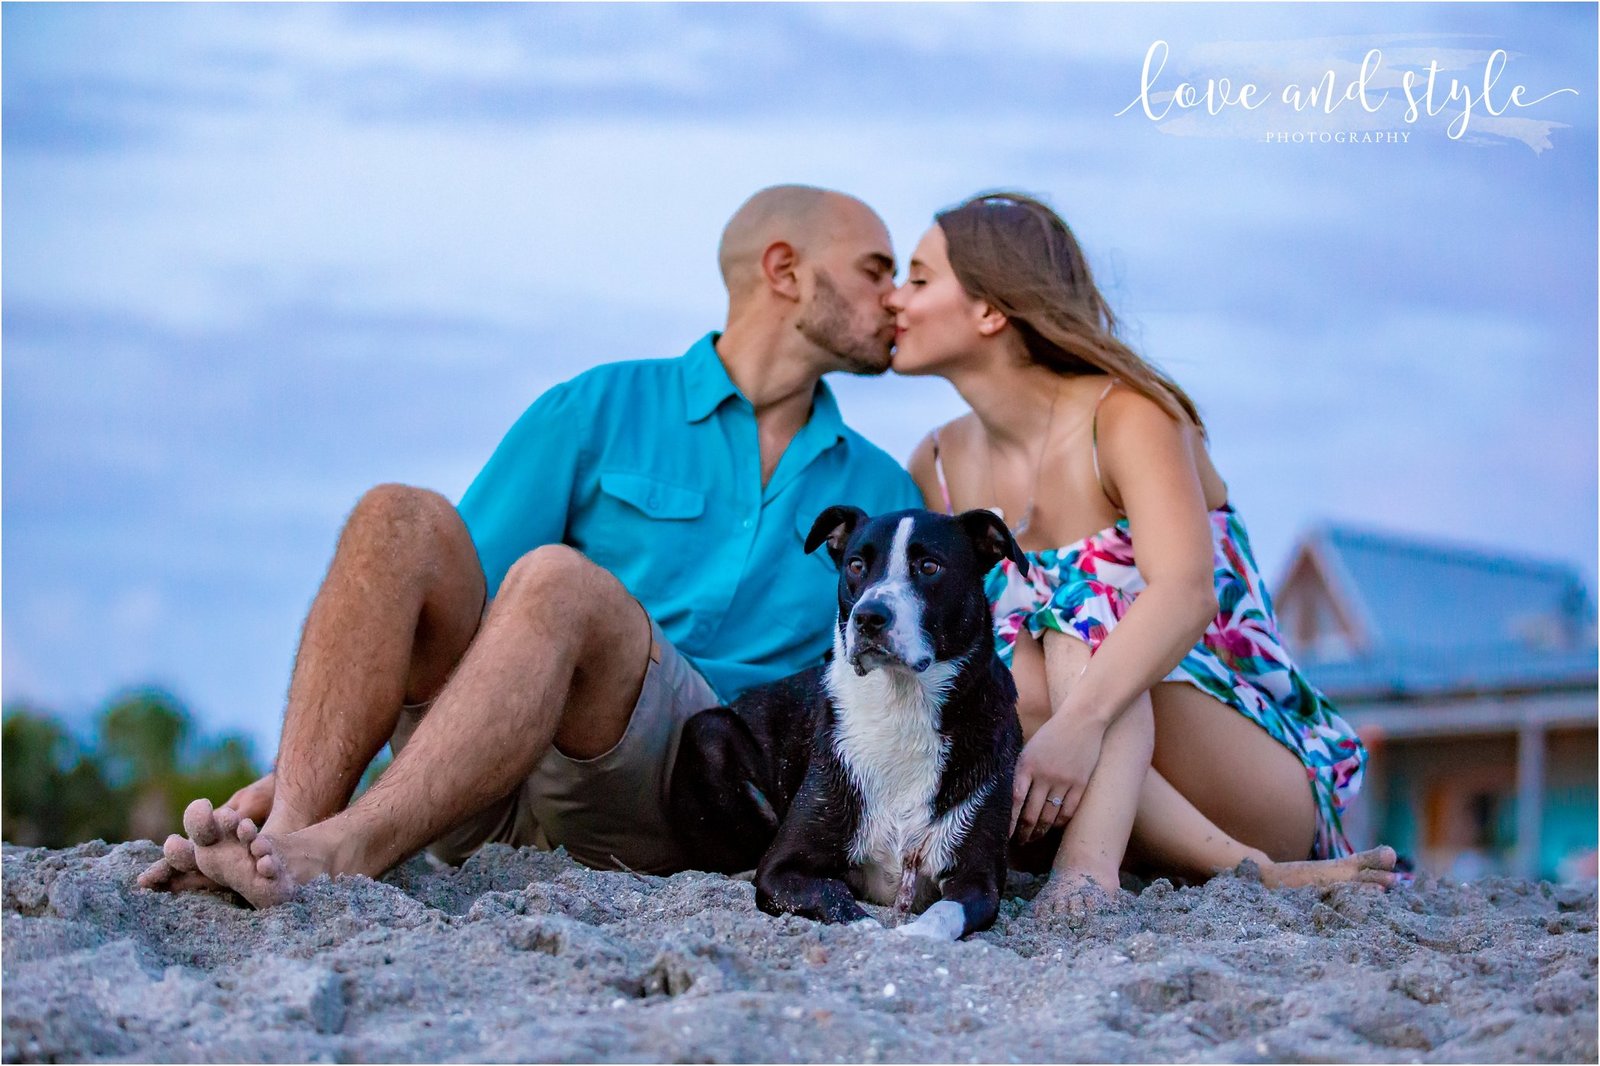 Engagement Photography at the Venice Dog Beach with the couple and their dog